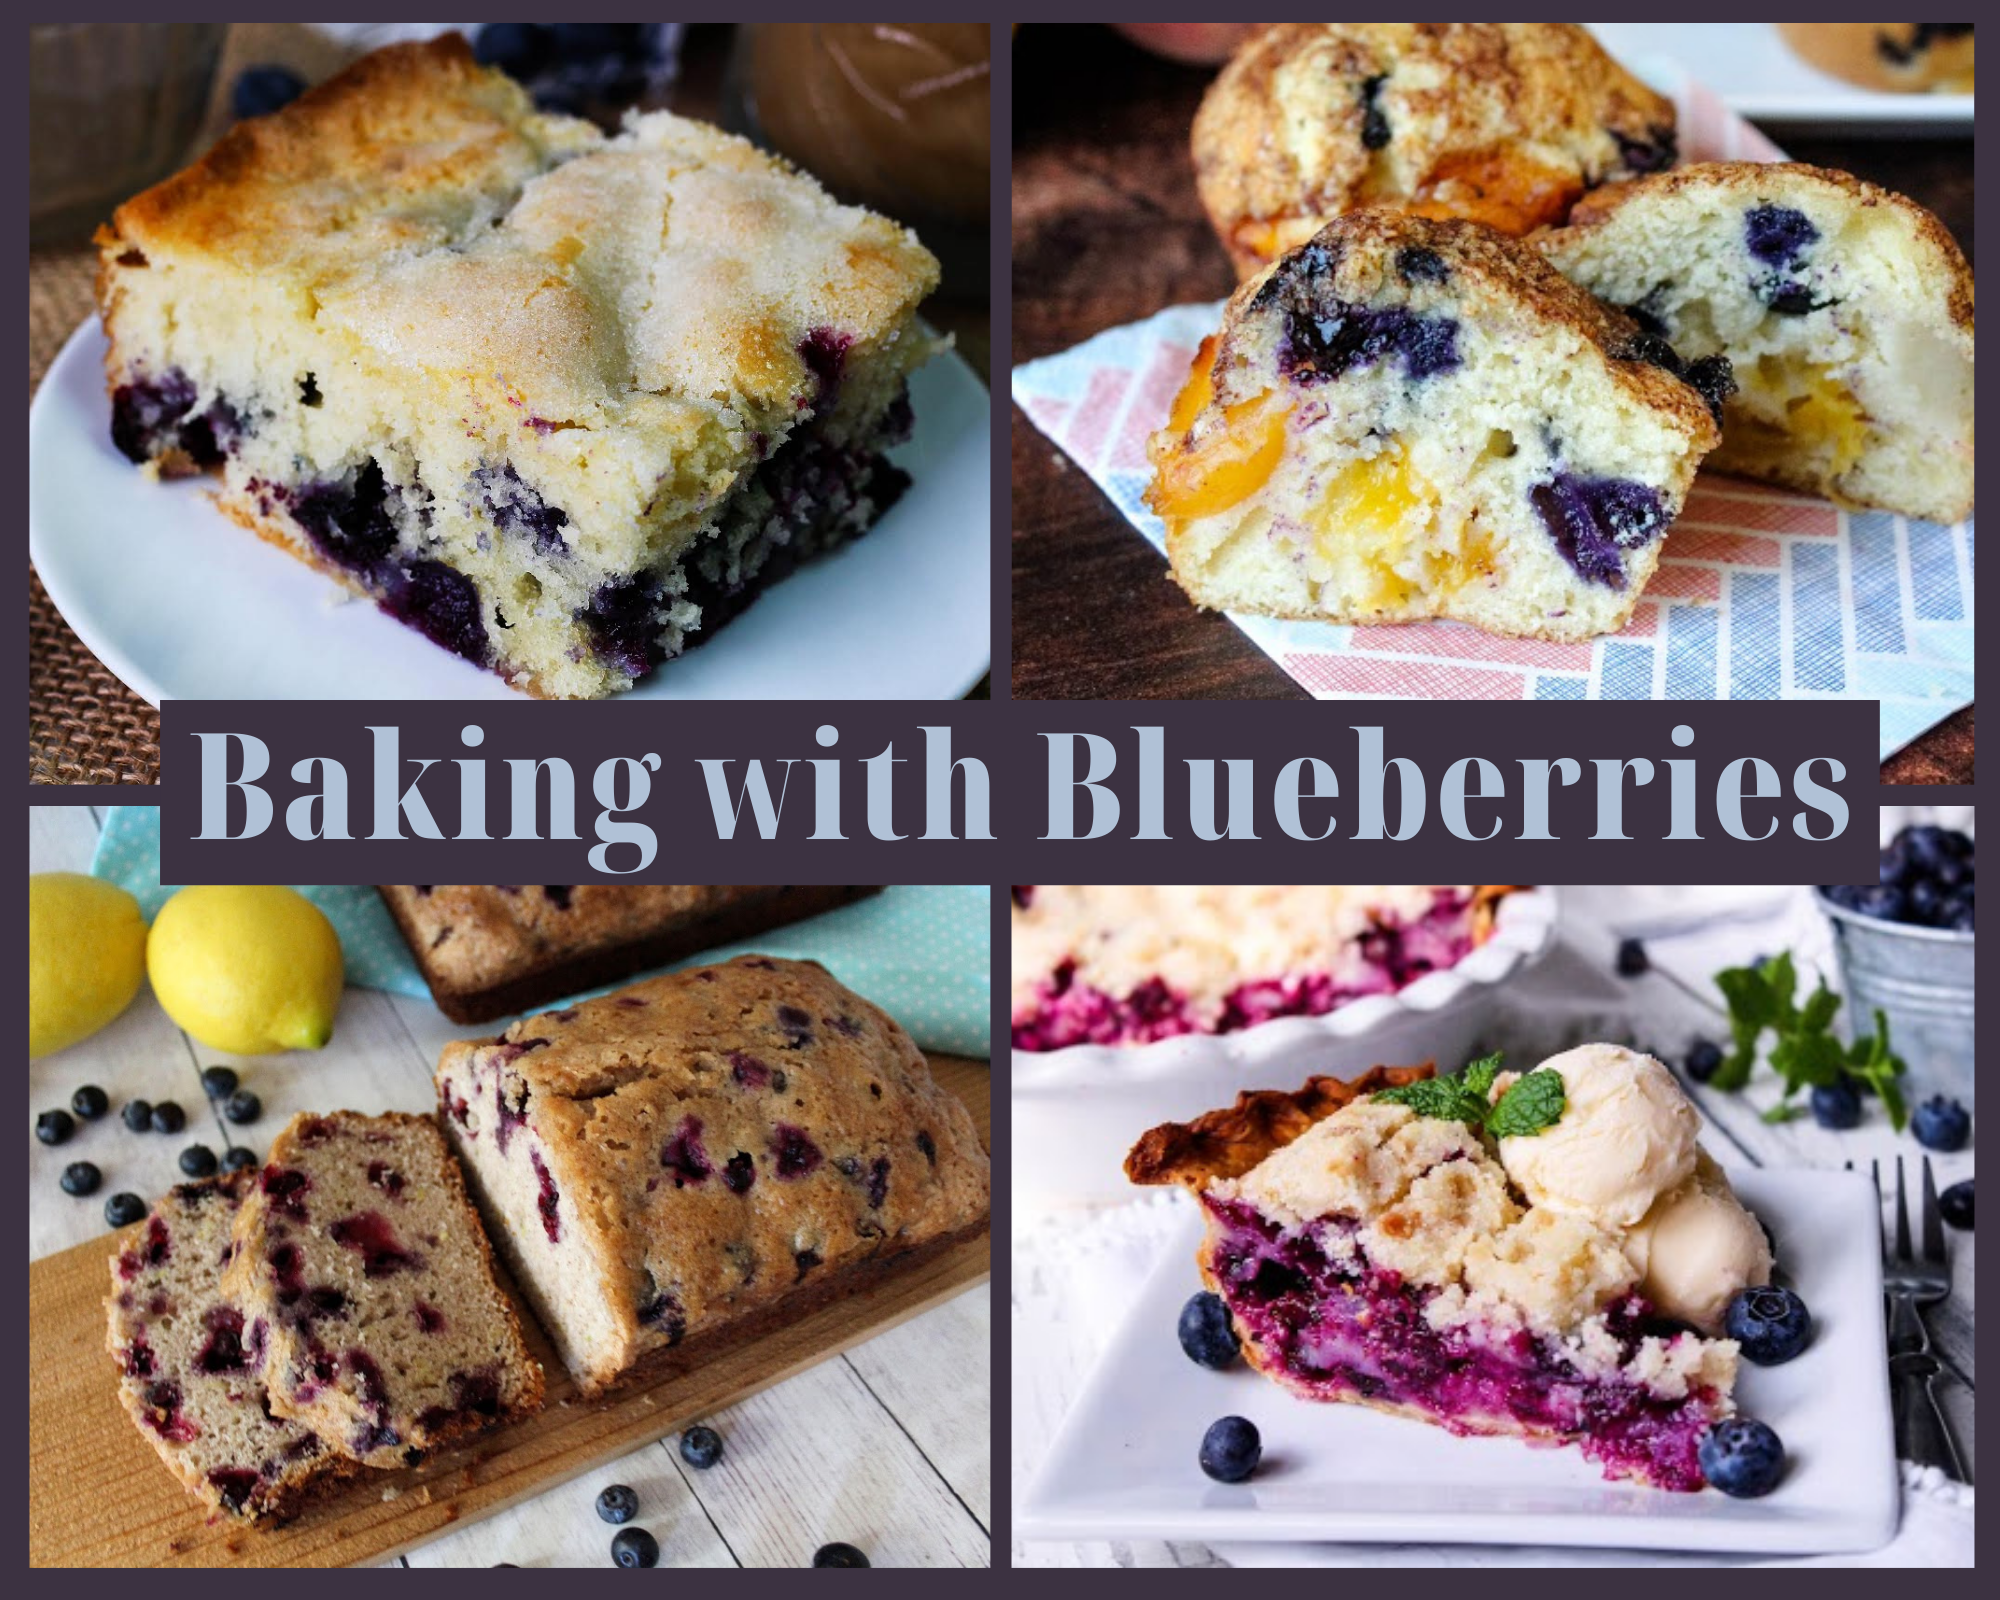 Baking with blueberries